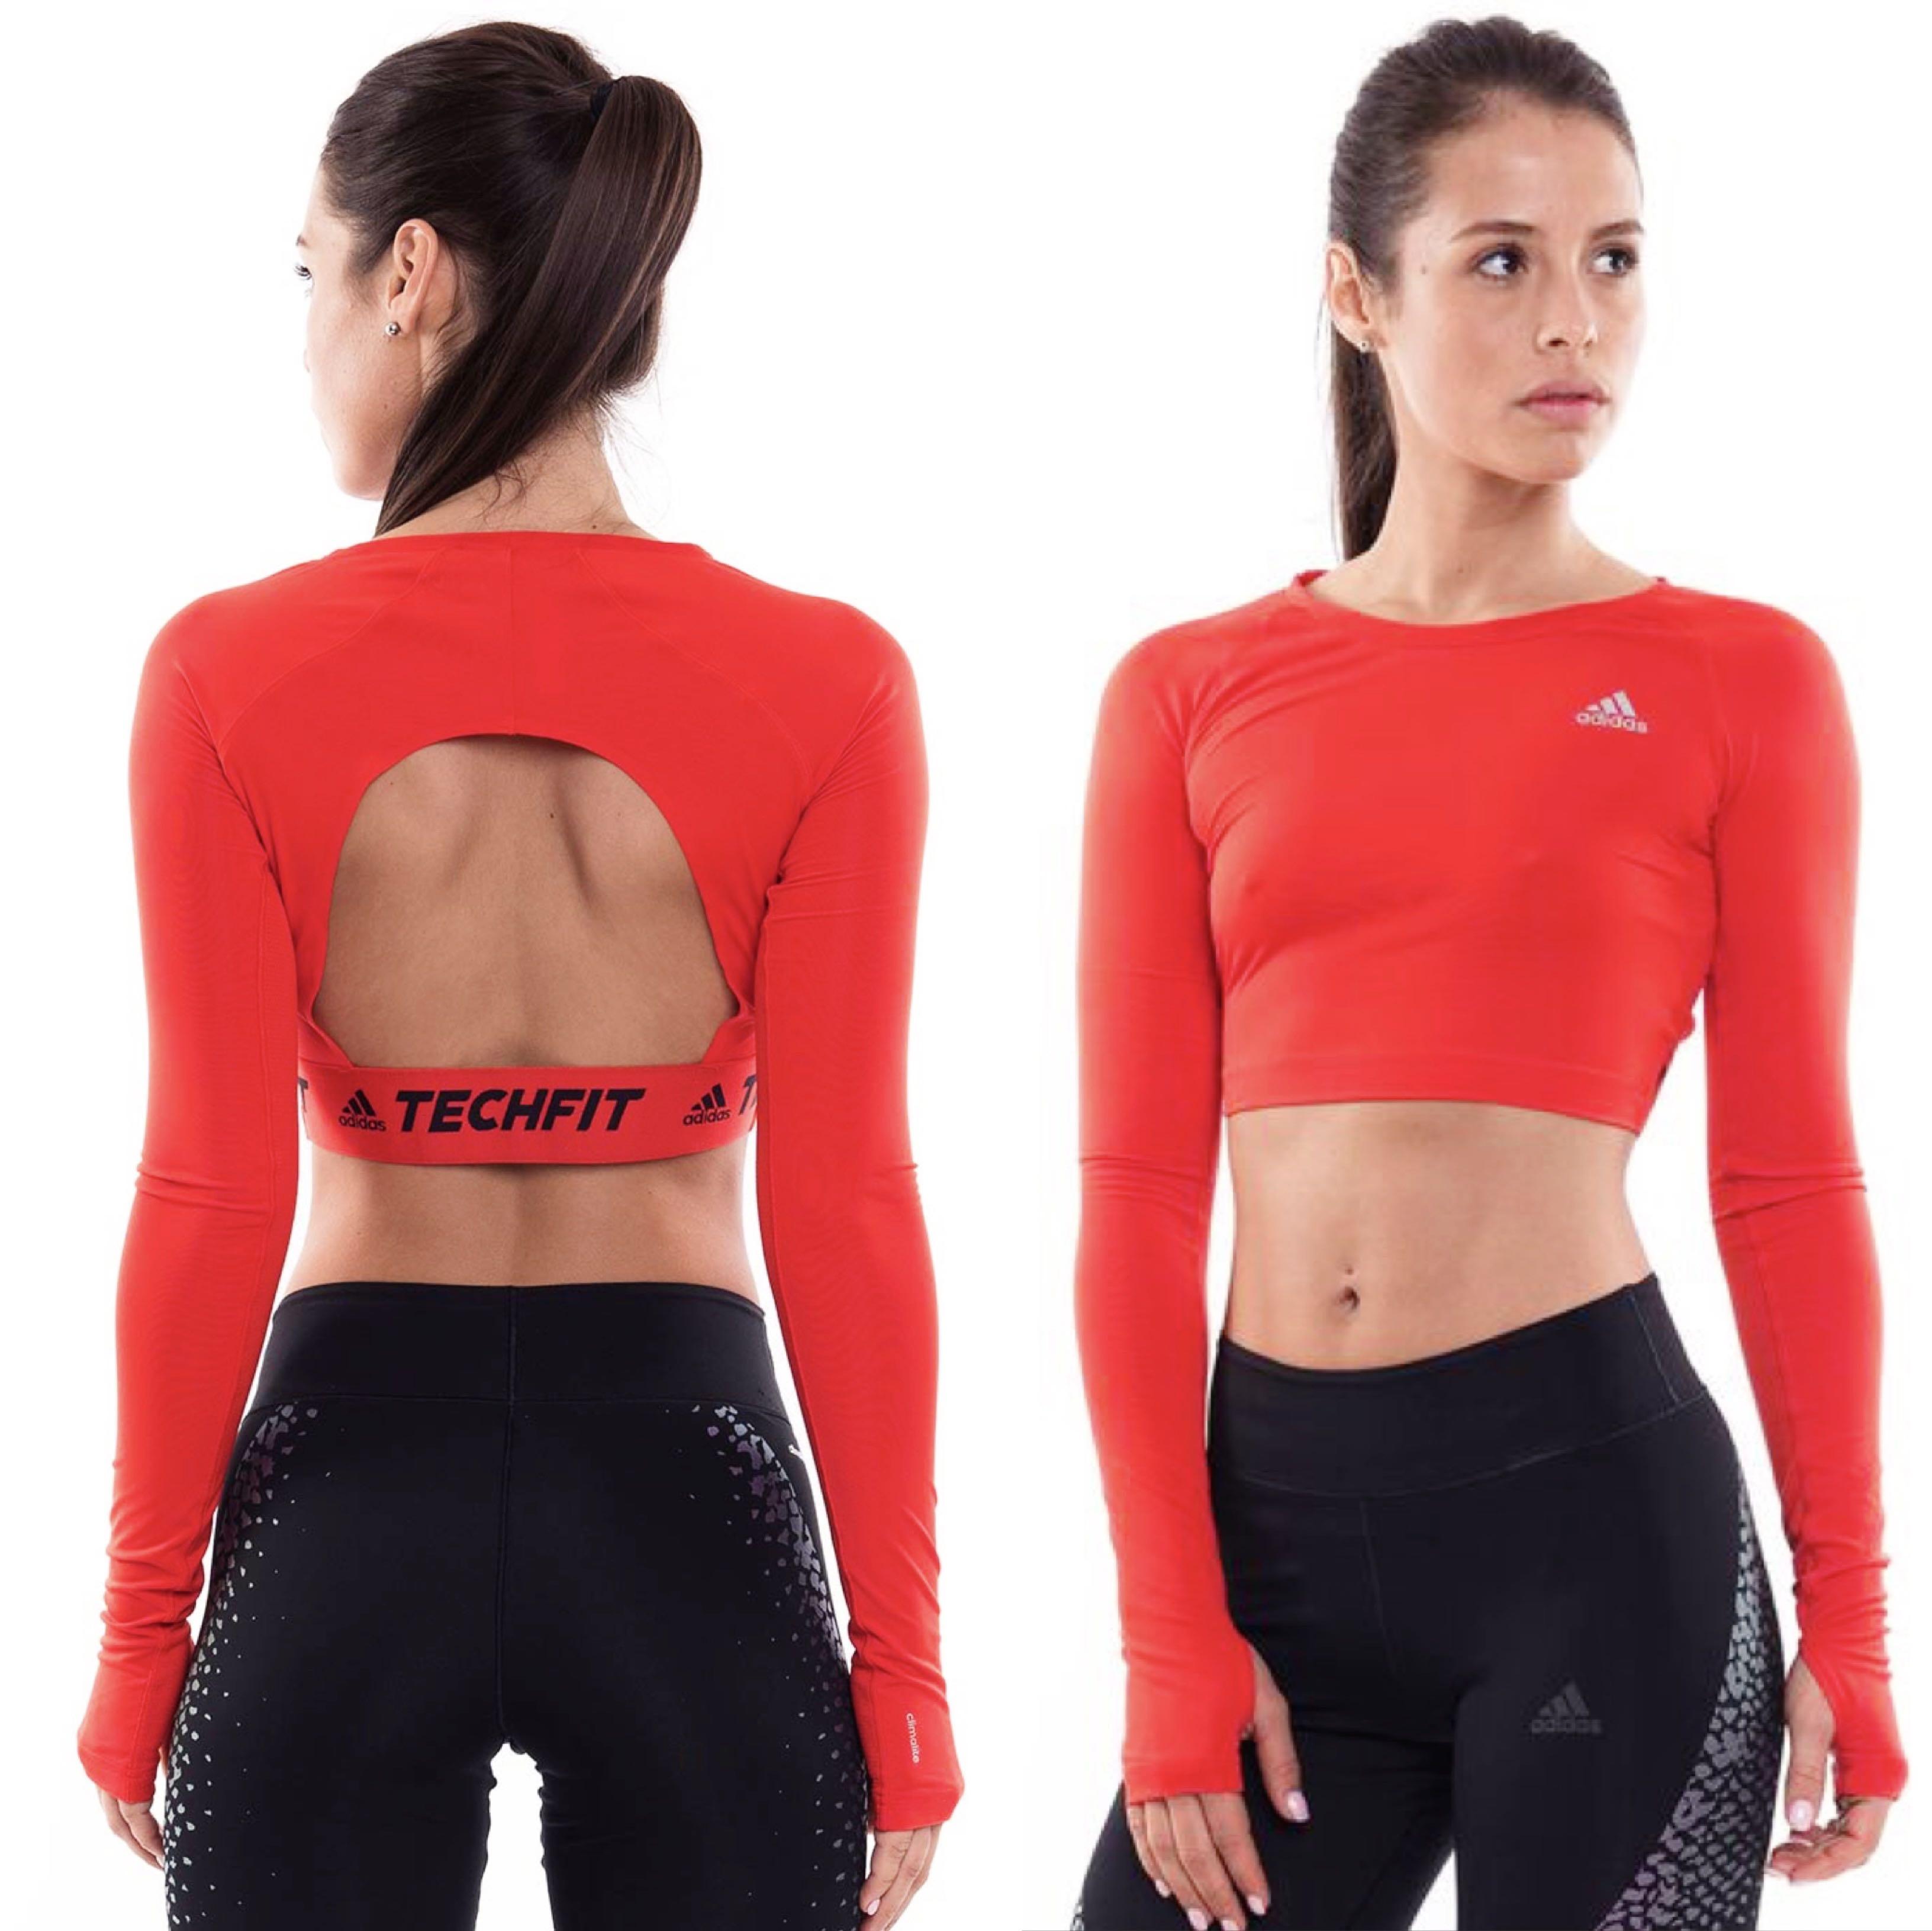 Adidas XS Techfit Crop Top in Core Red, Men's Fashion, Activewear